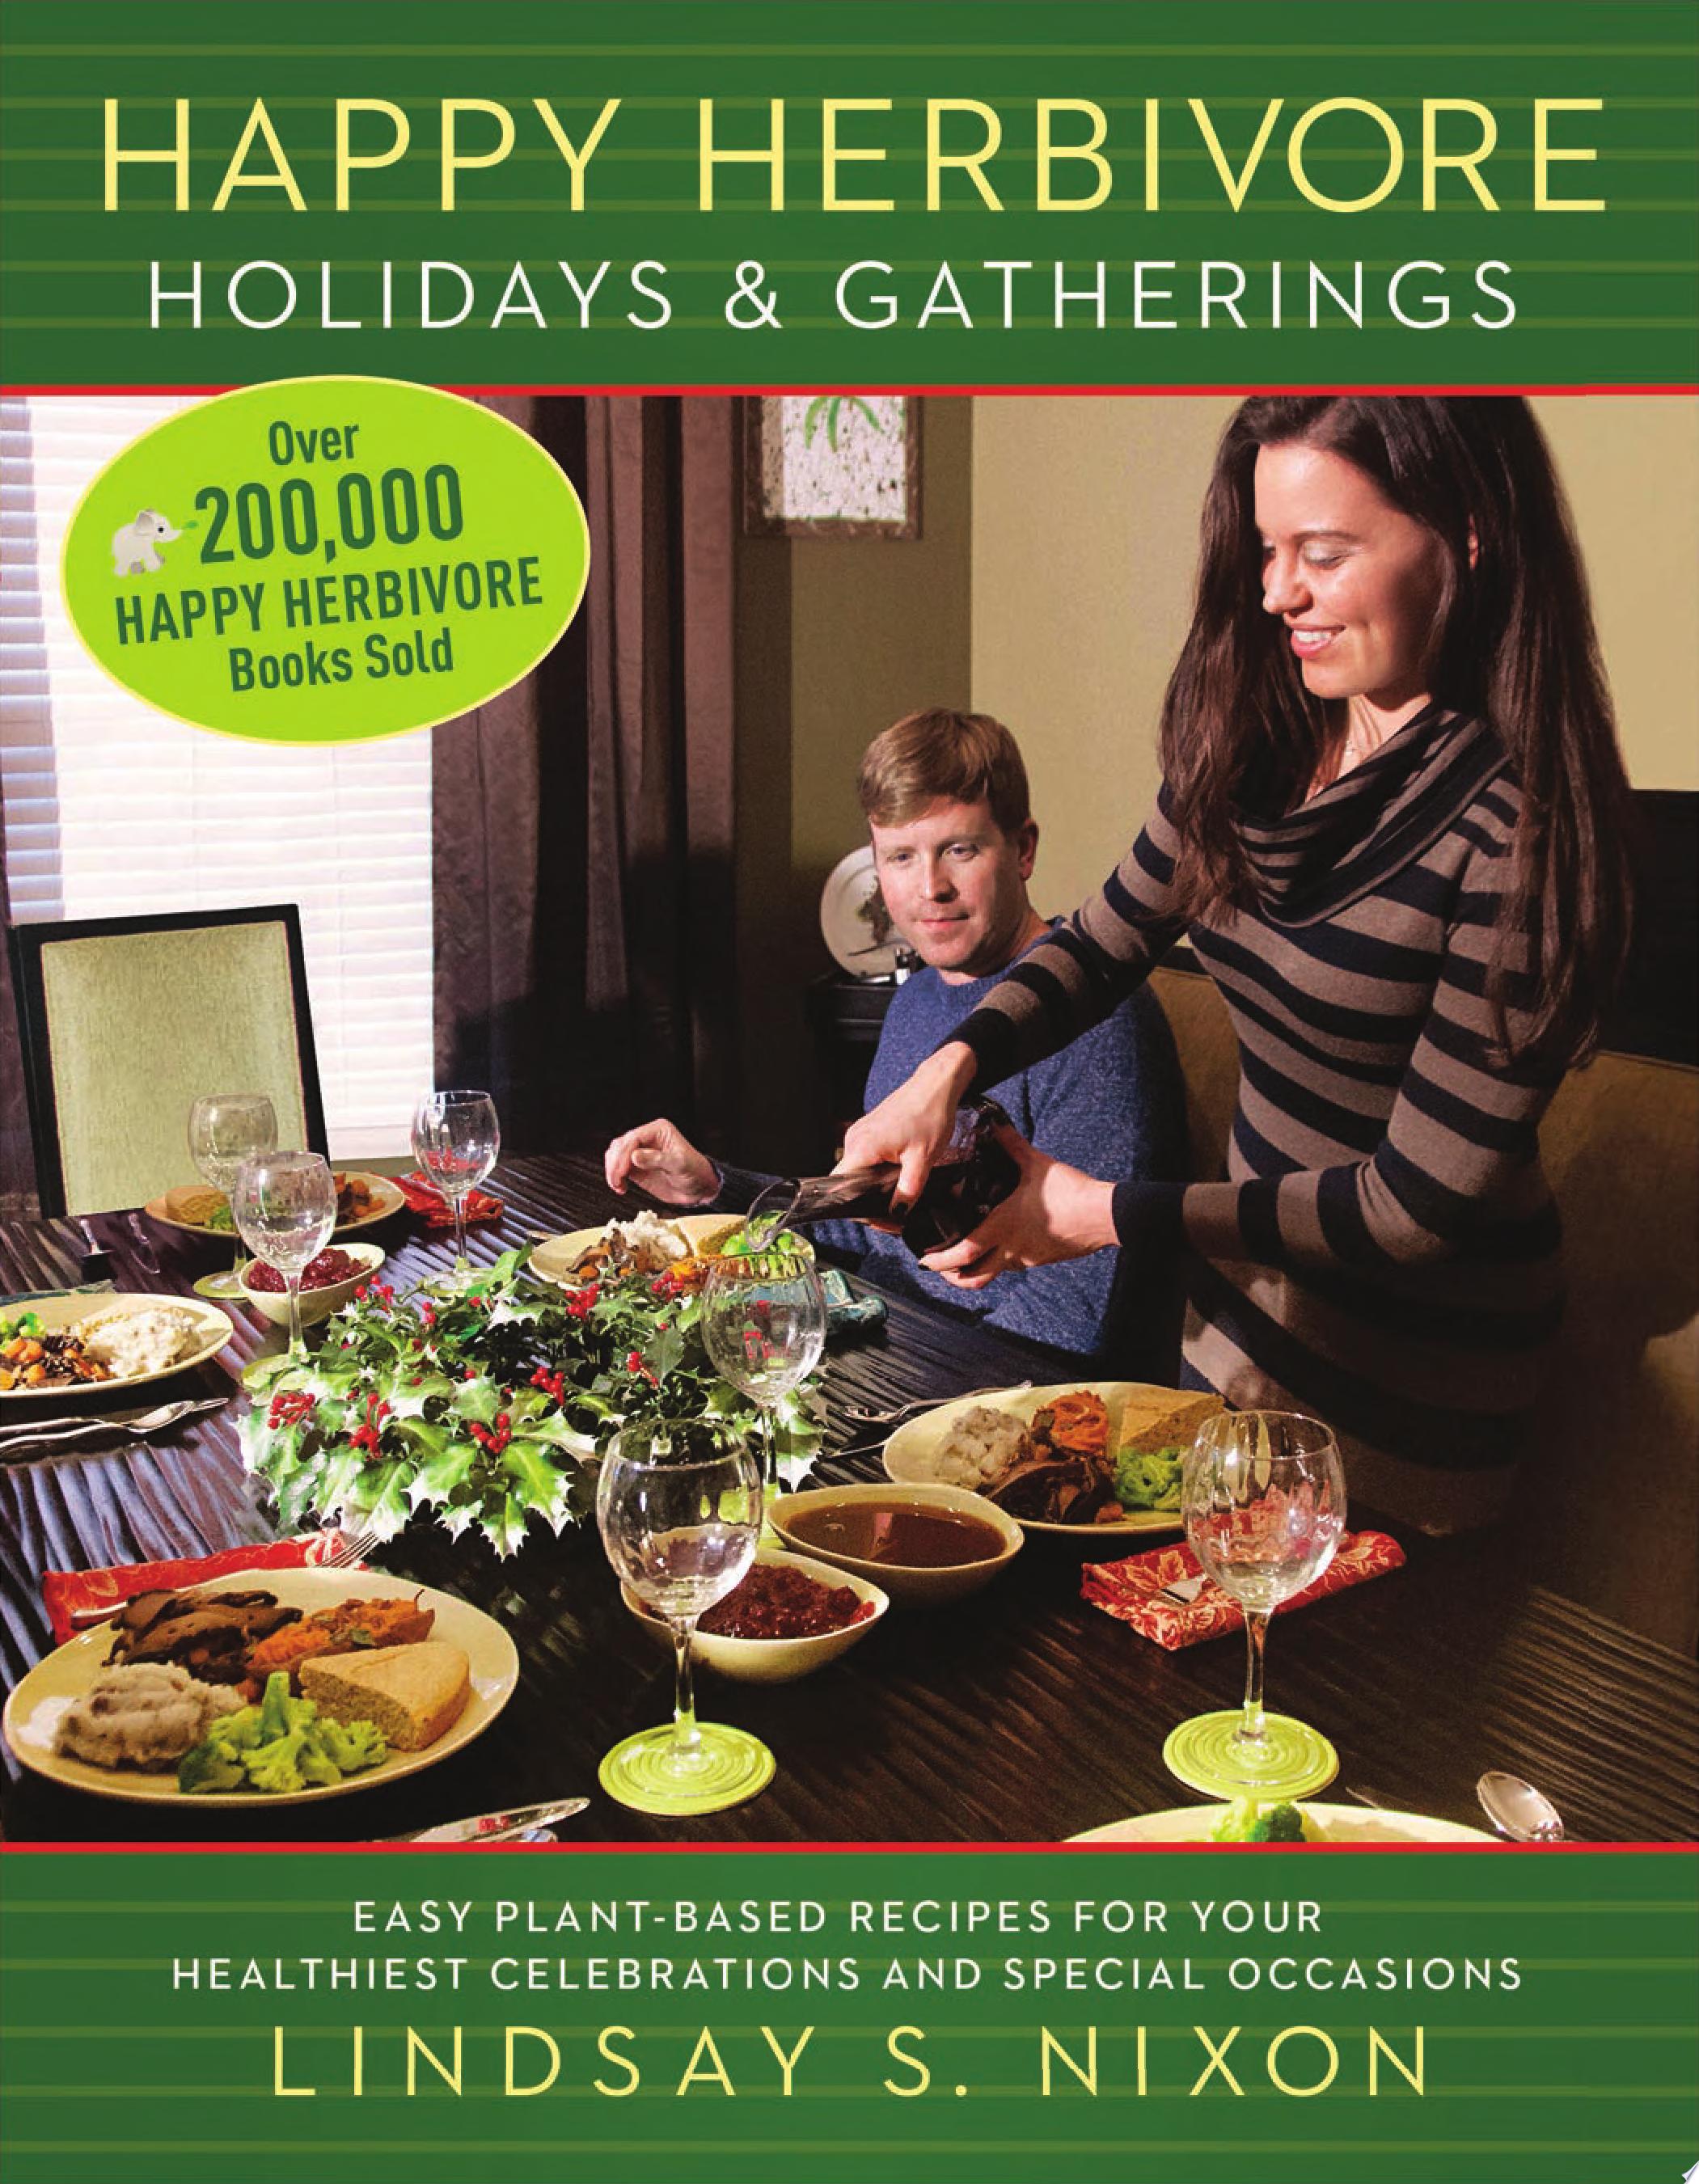 Image for "Happy Herbivore Holidays & Gatherings"